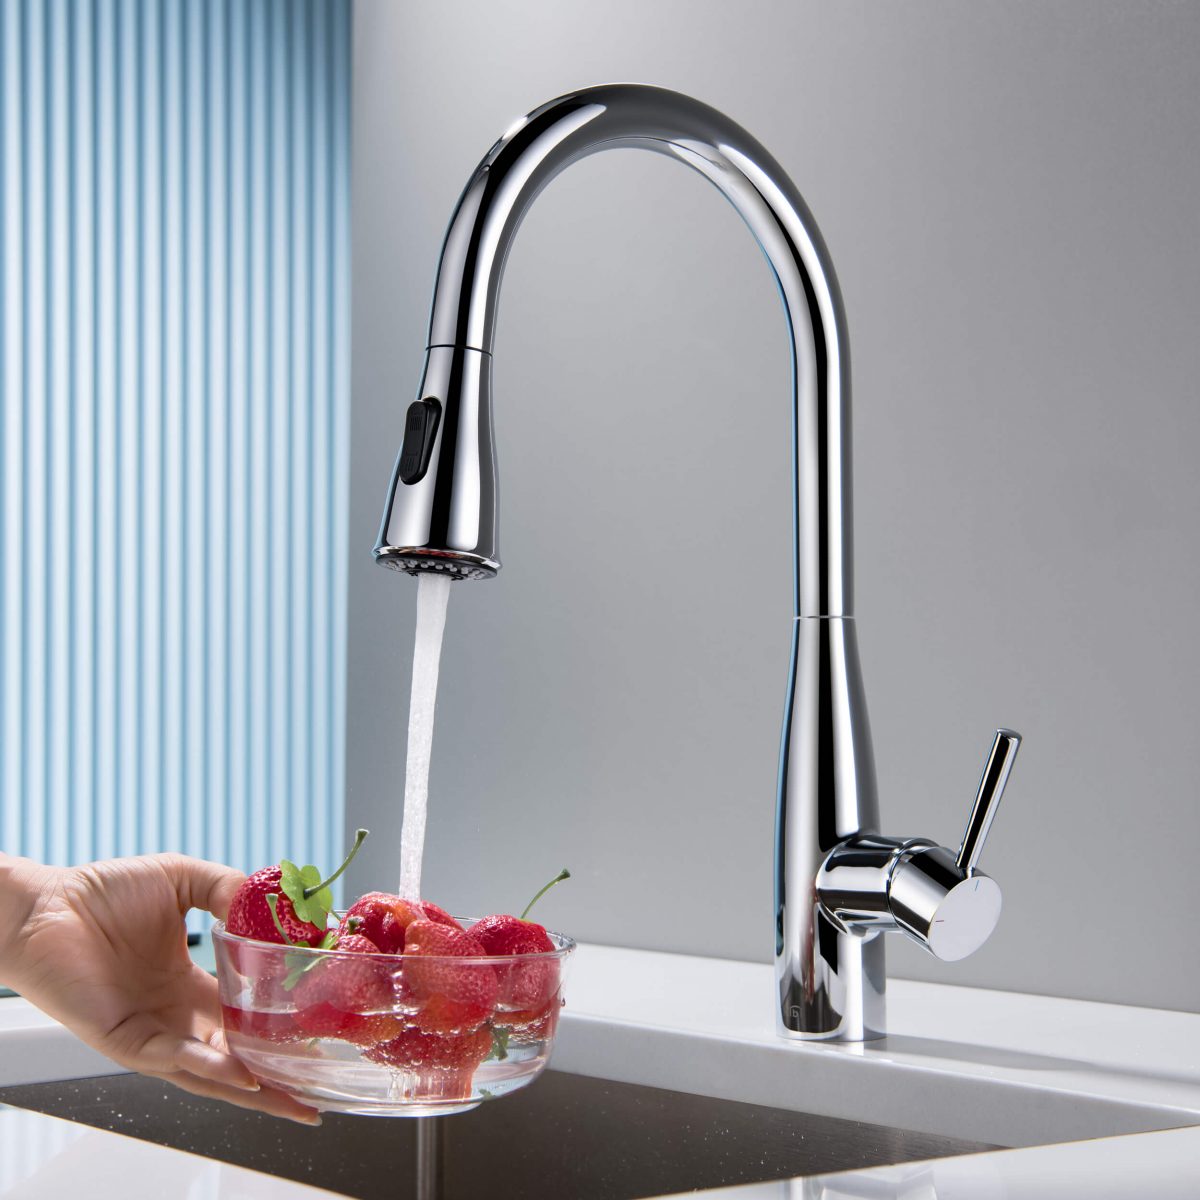 Bari-T Single Handle Pull Down Kitchen Sink Faucet